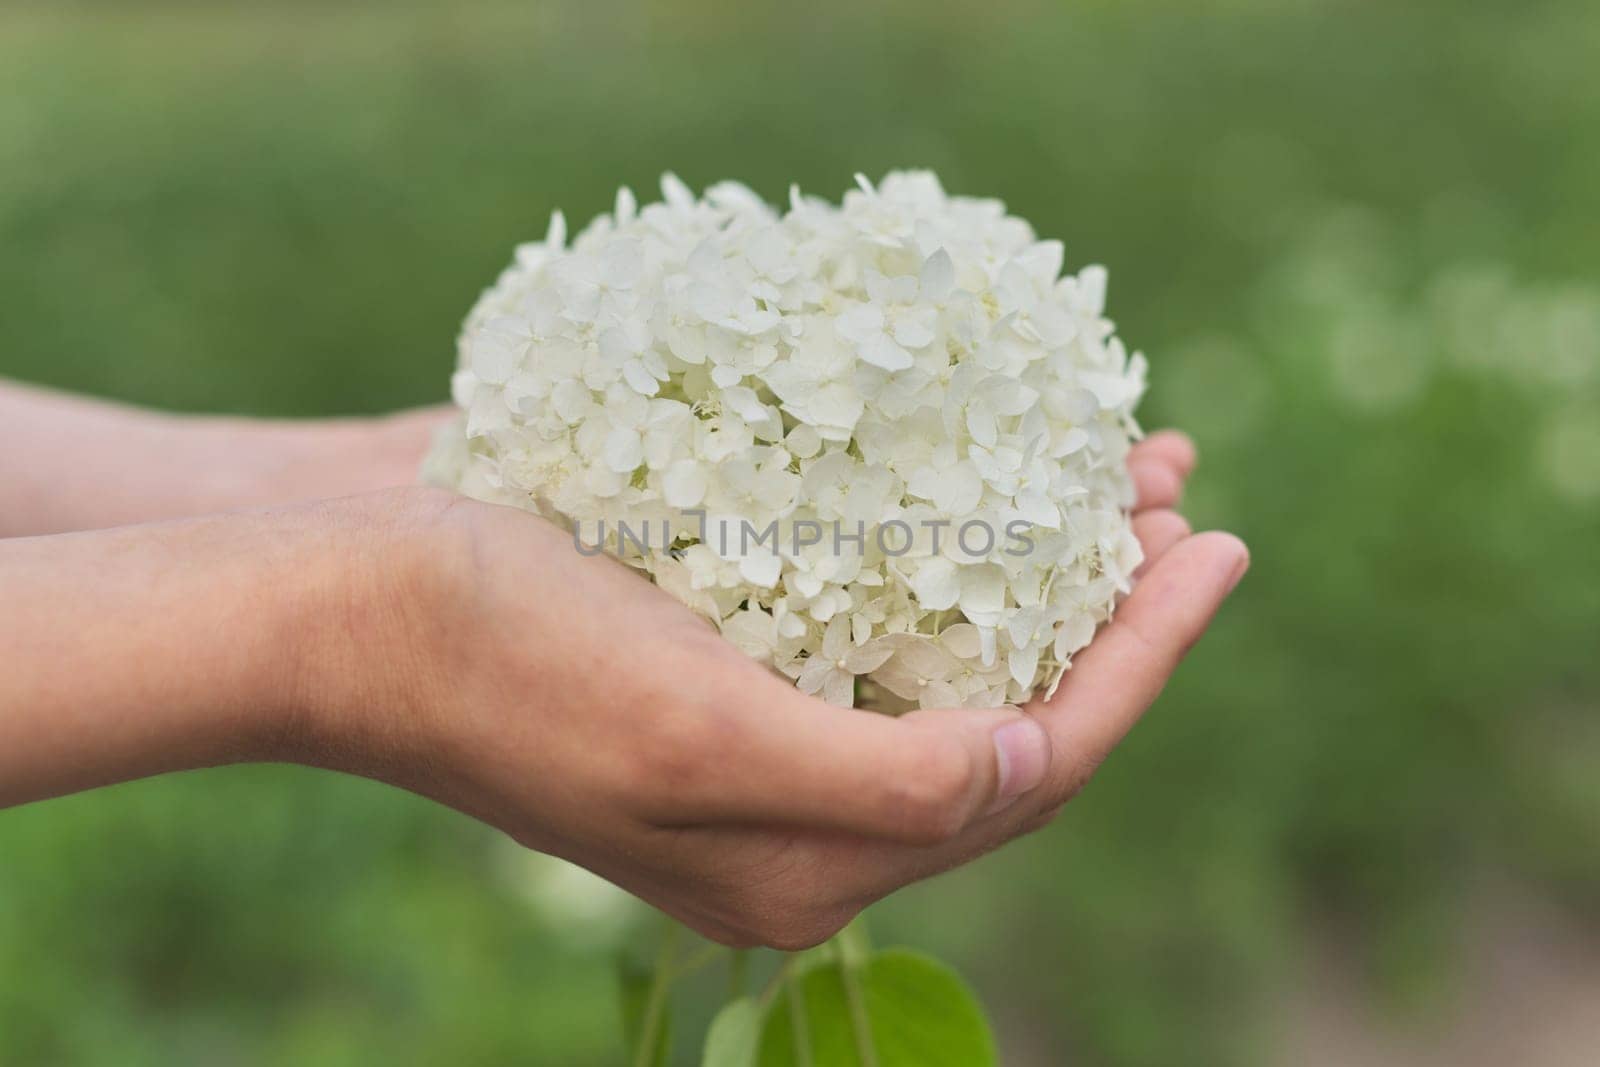 Female hand holding white hydrangea flower. Beauty, natural floral and herbal cosmetics and perfumes